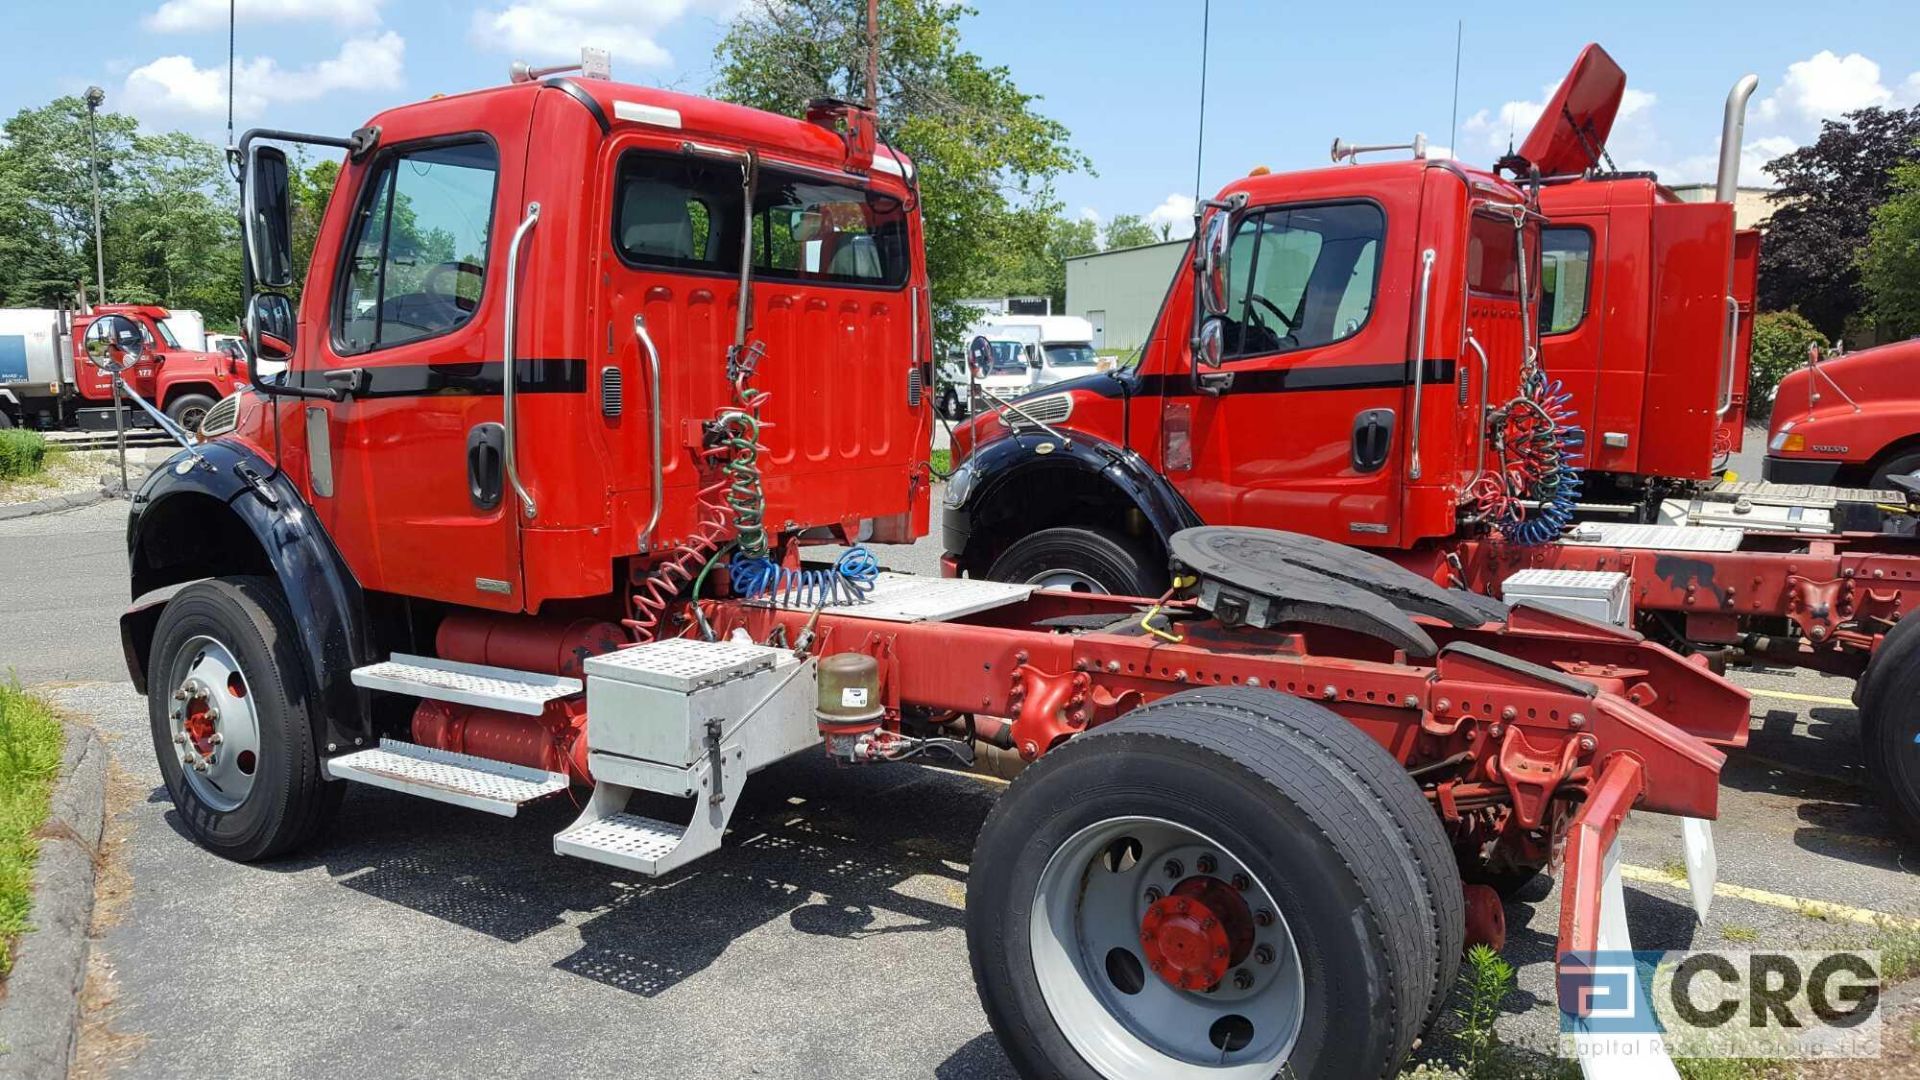 2006 Freightliner Business Class M2, SA tractor, with Eaton Fuller, 10 speed transmission, Simplex - Image 3 of 5